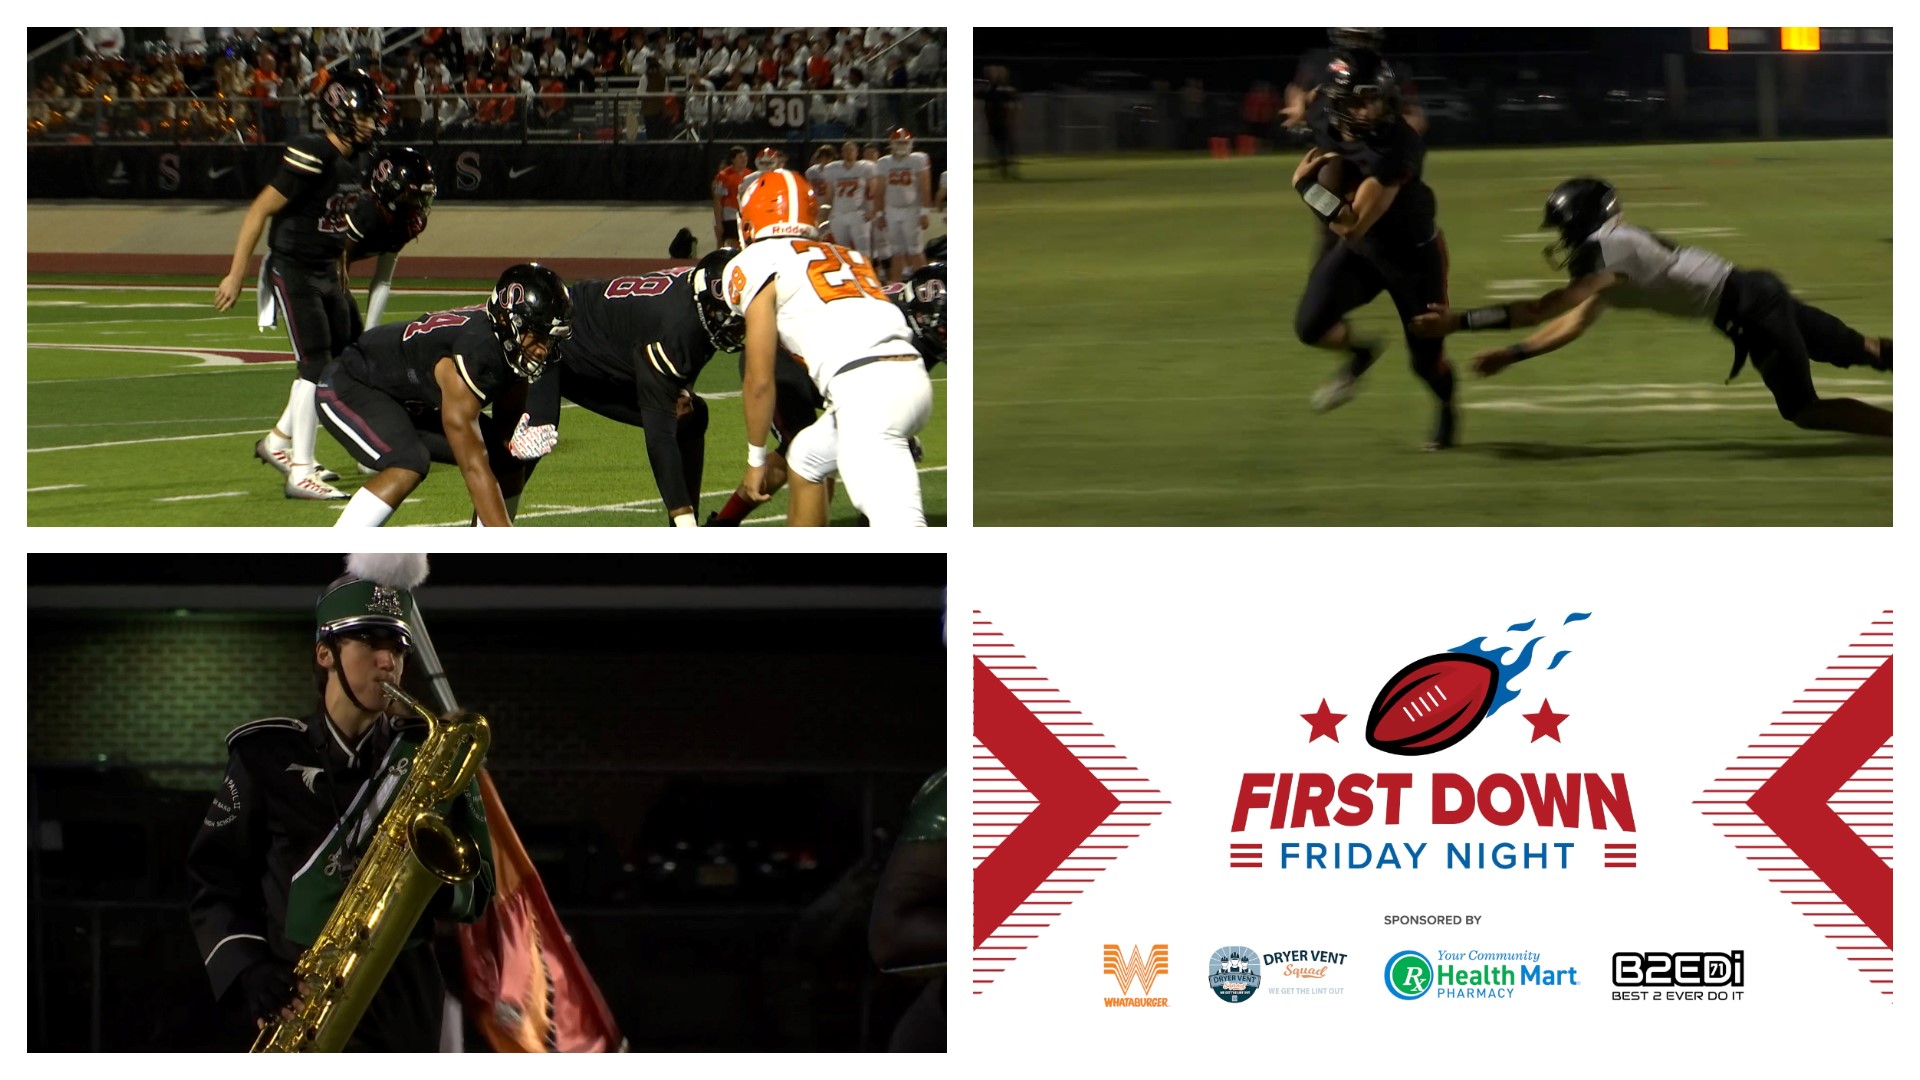 Region play began to heat up in the AHSAA. We've got several key matchups on the newest episode of First Down Friday Night